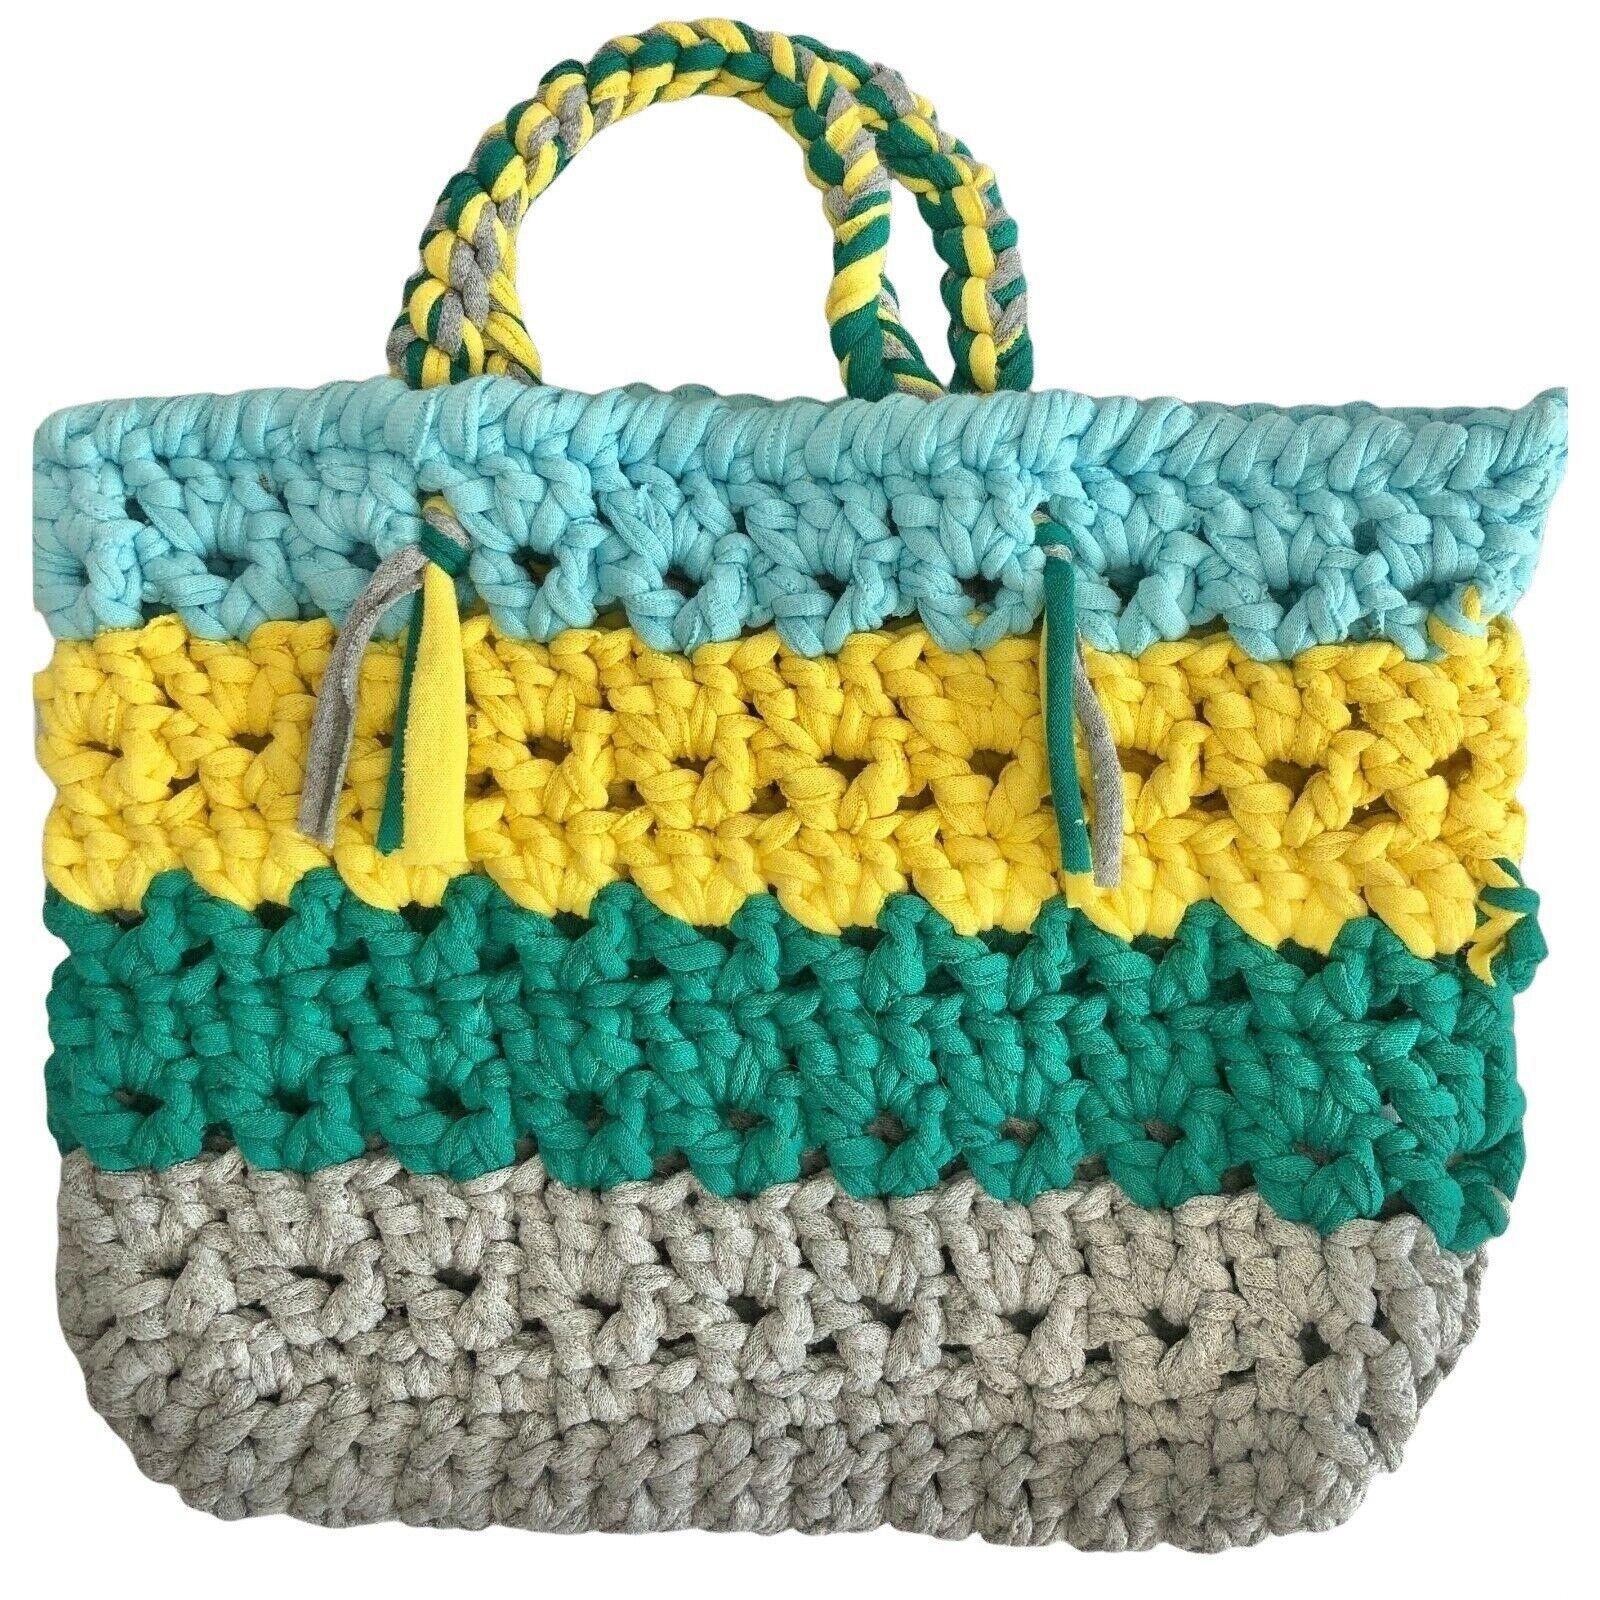 Primary image for Hand crafted Crocheted Purse Bag Recycled T-Shirts NEW